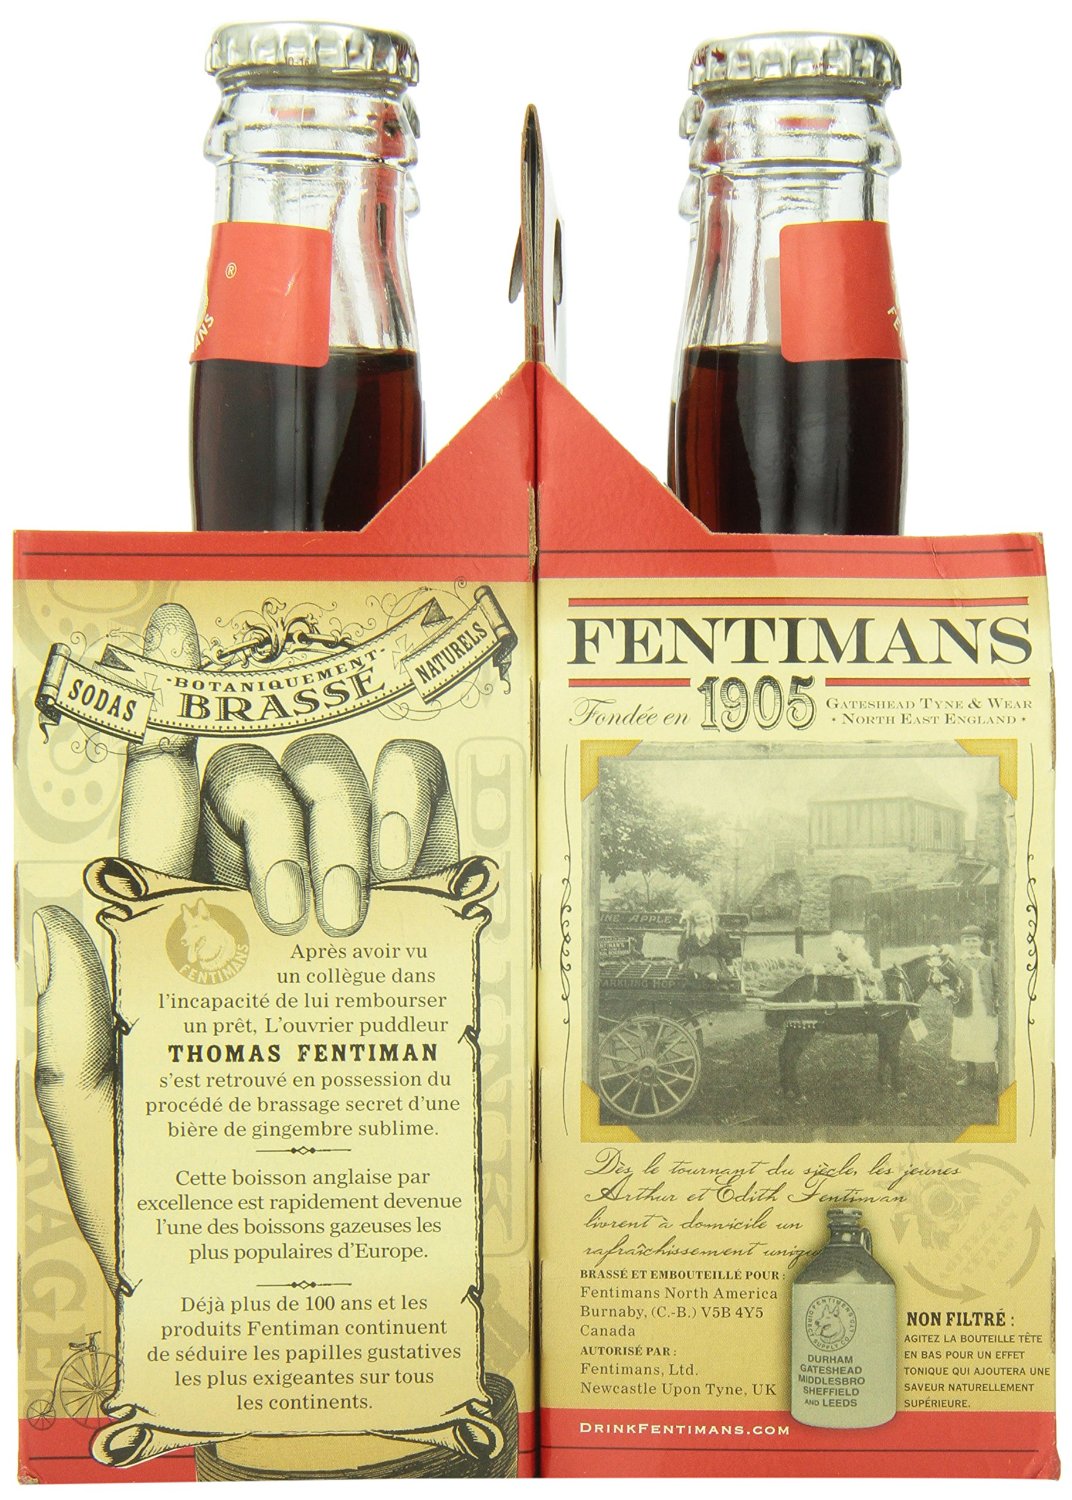 Fentimans, Cherry Tree Cola, Botanically Brewed, Fermented Botanical Cherry Drink With Ginger And Herbal Extracts - 667450001195